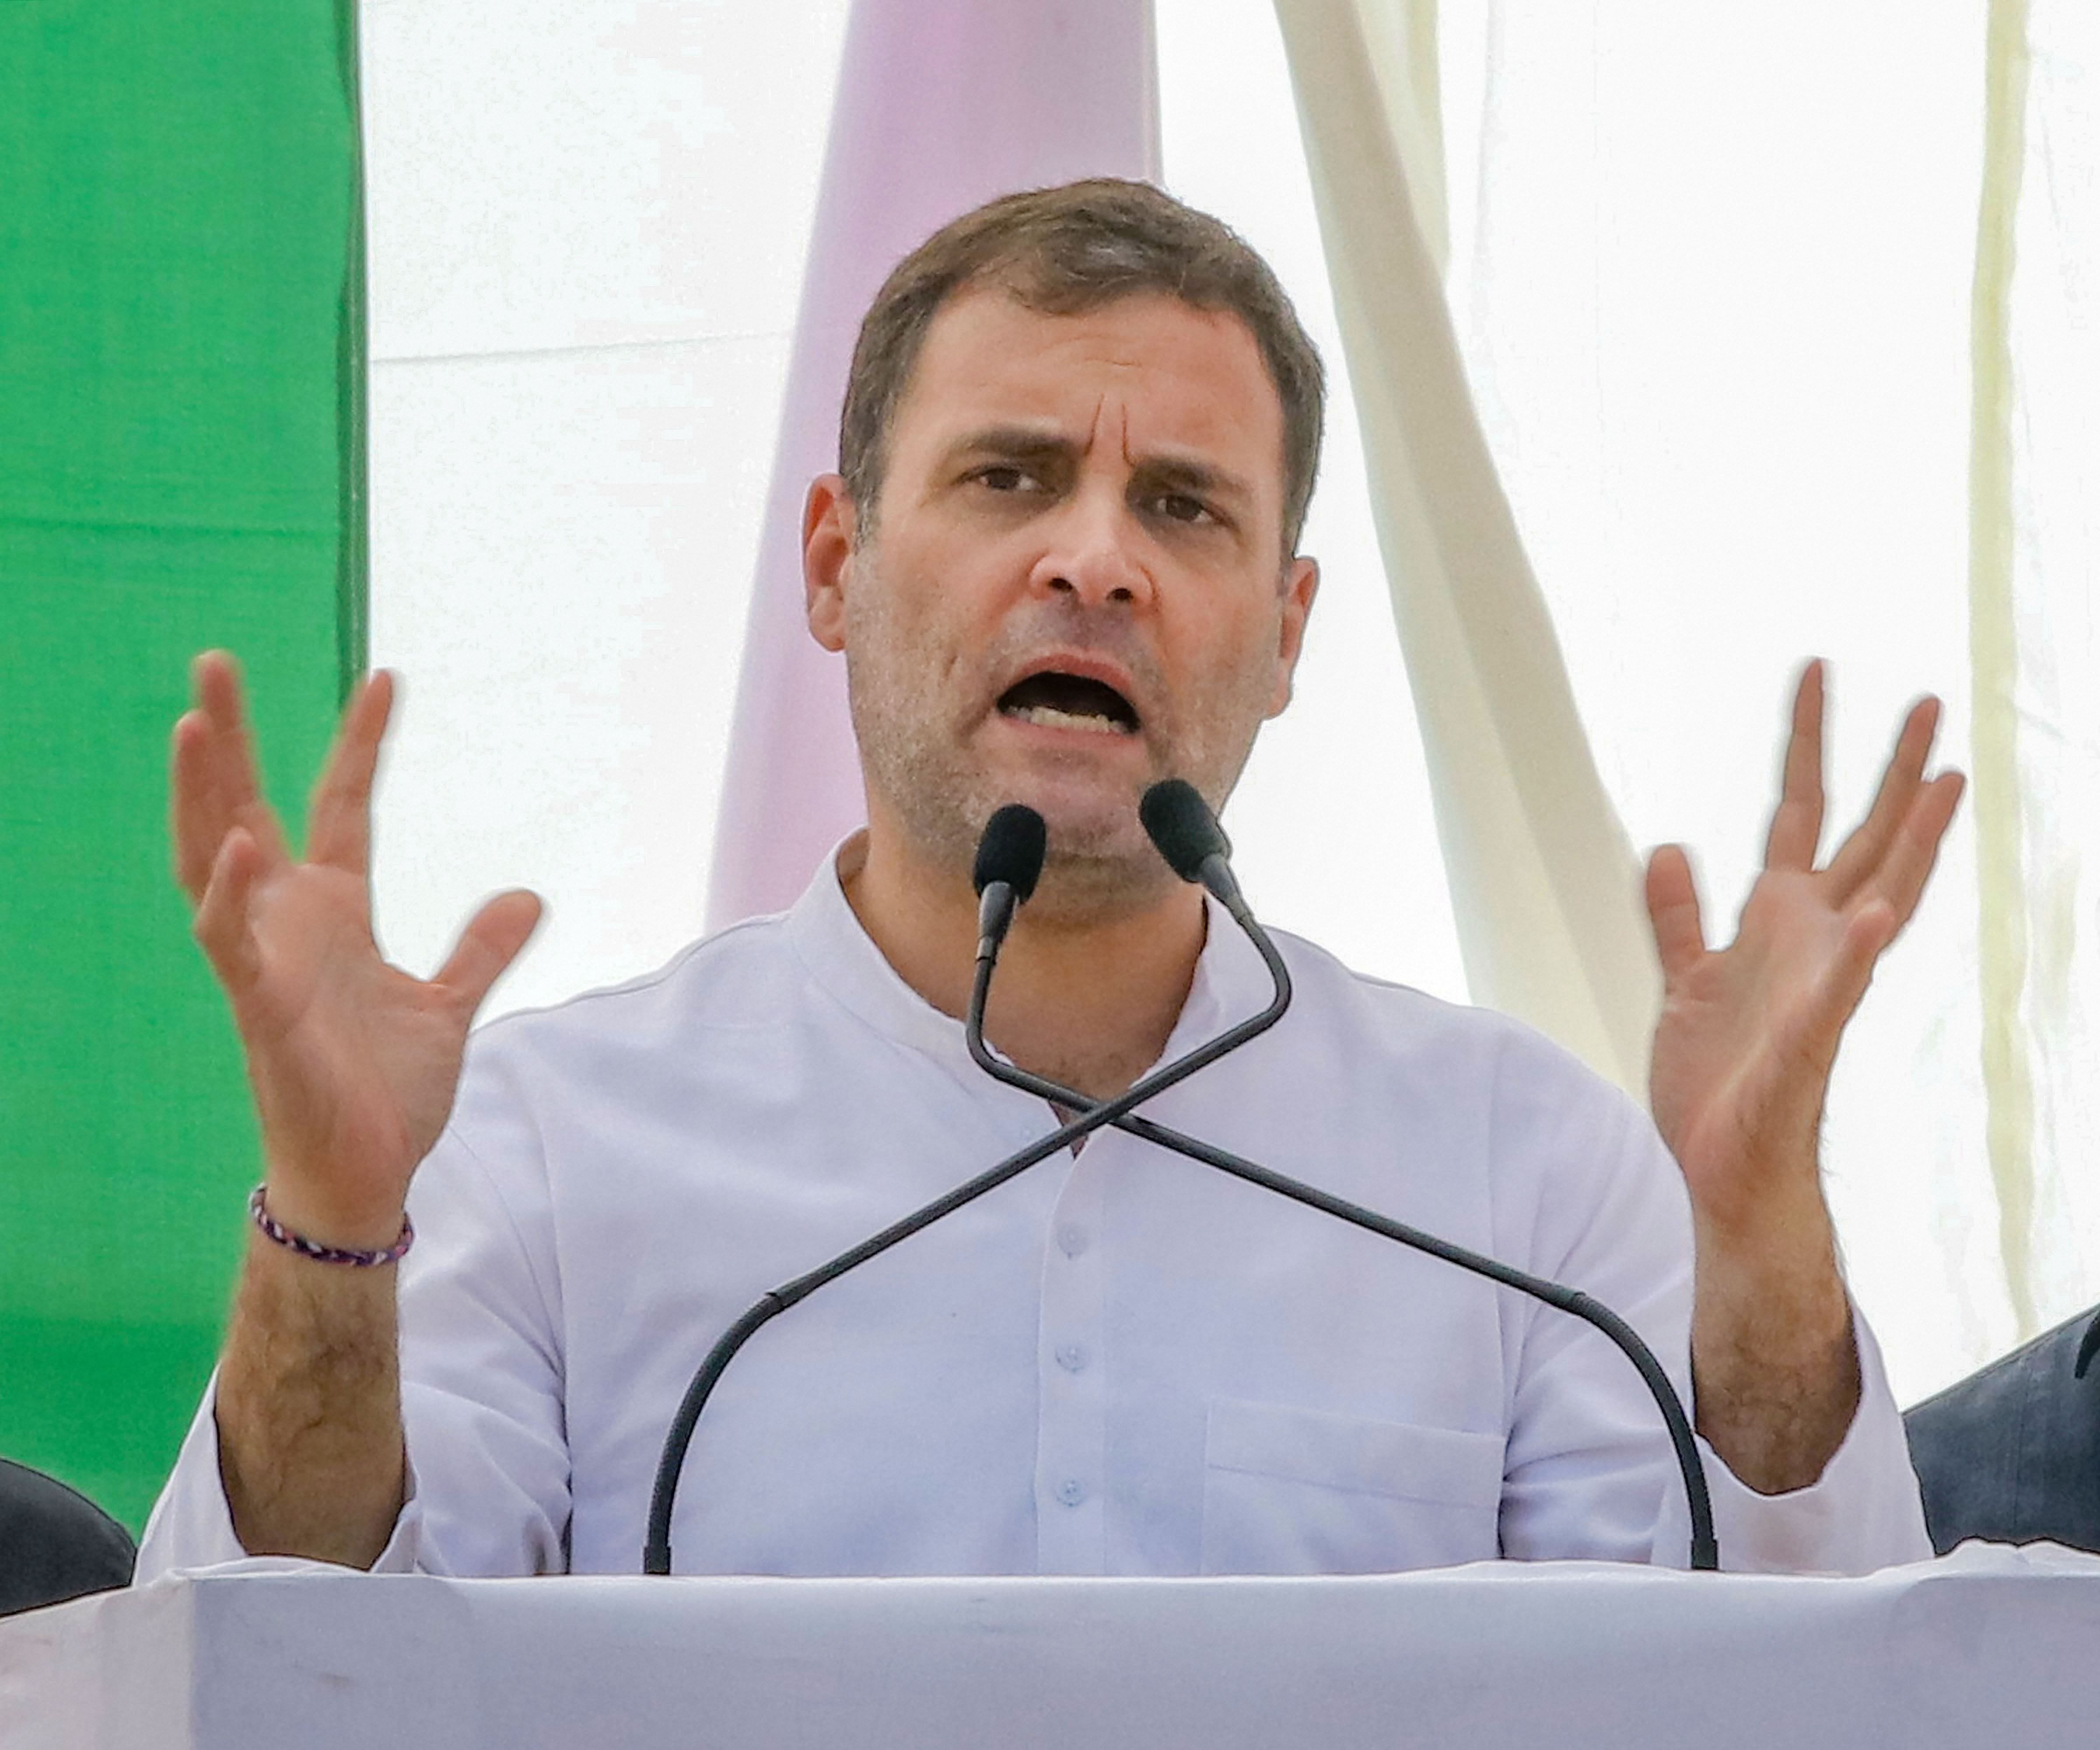 Congress leader Rahul Gandhi said the Congress had earlier said that the government should step forward to help the vulnerable and the middle class, and had made two suggestions. Credit: PTI File Photo